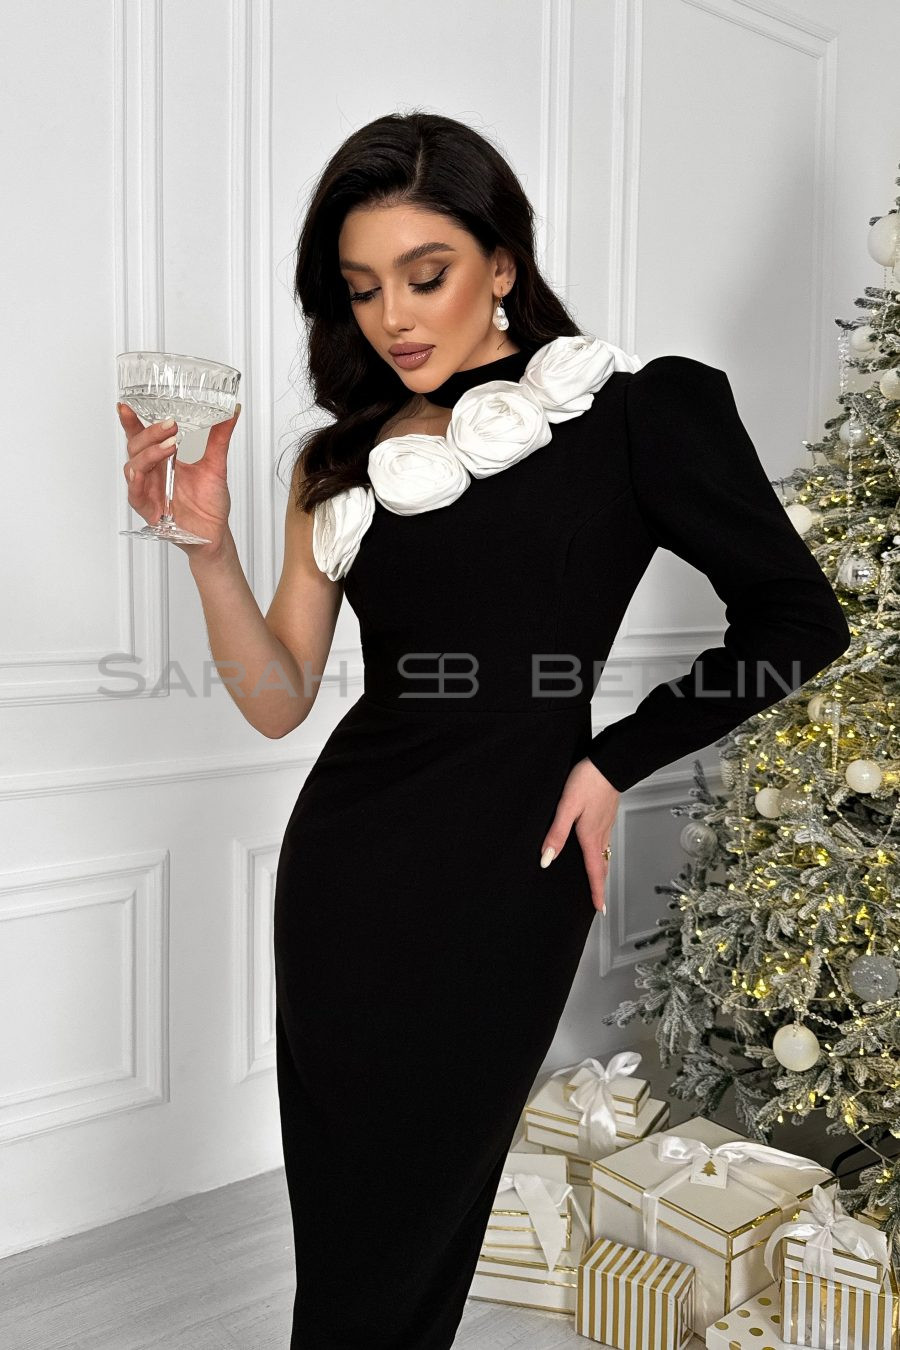 One-shoulder midi dress with stand-up collar and white roses